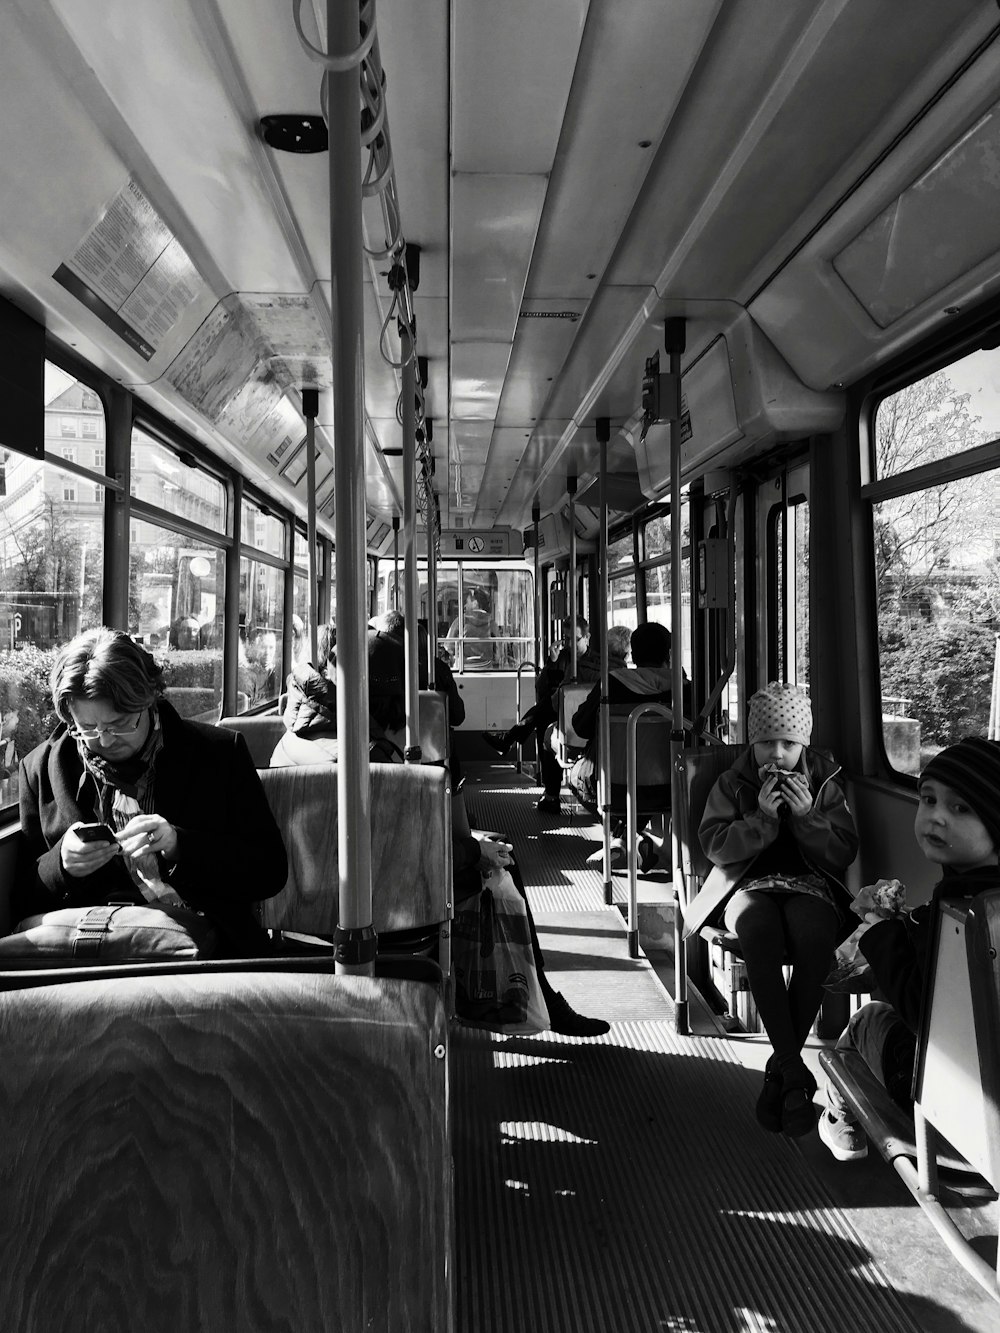 grayscale photo of person inside bus